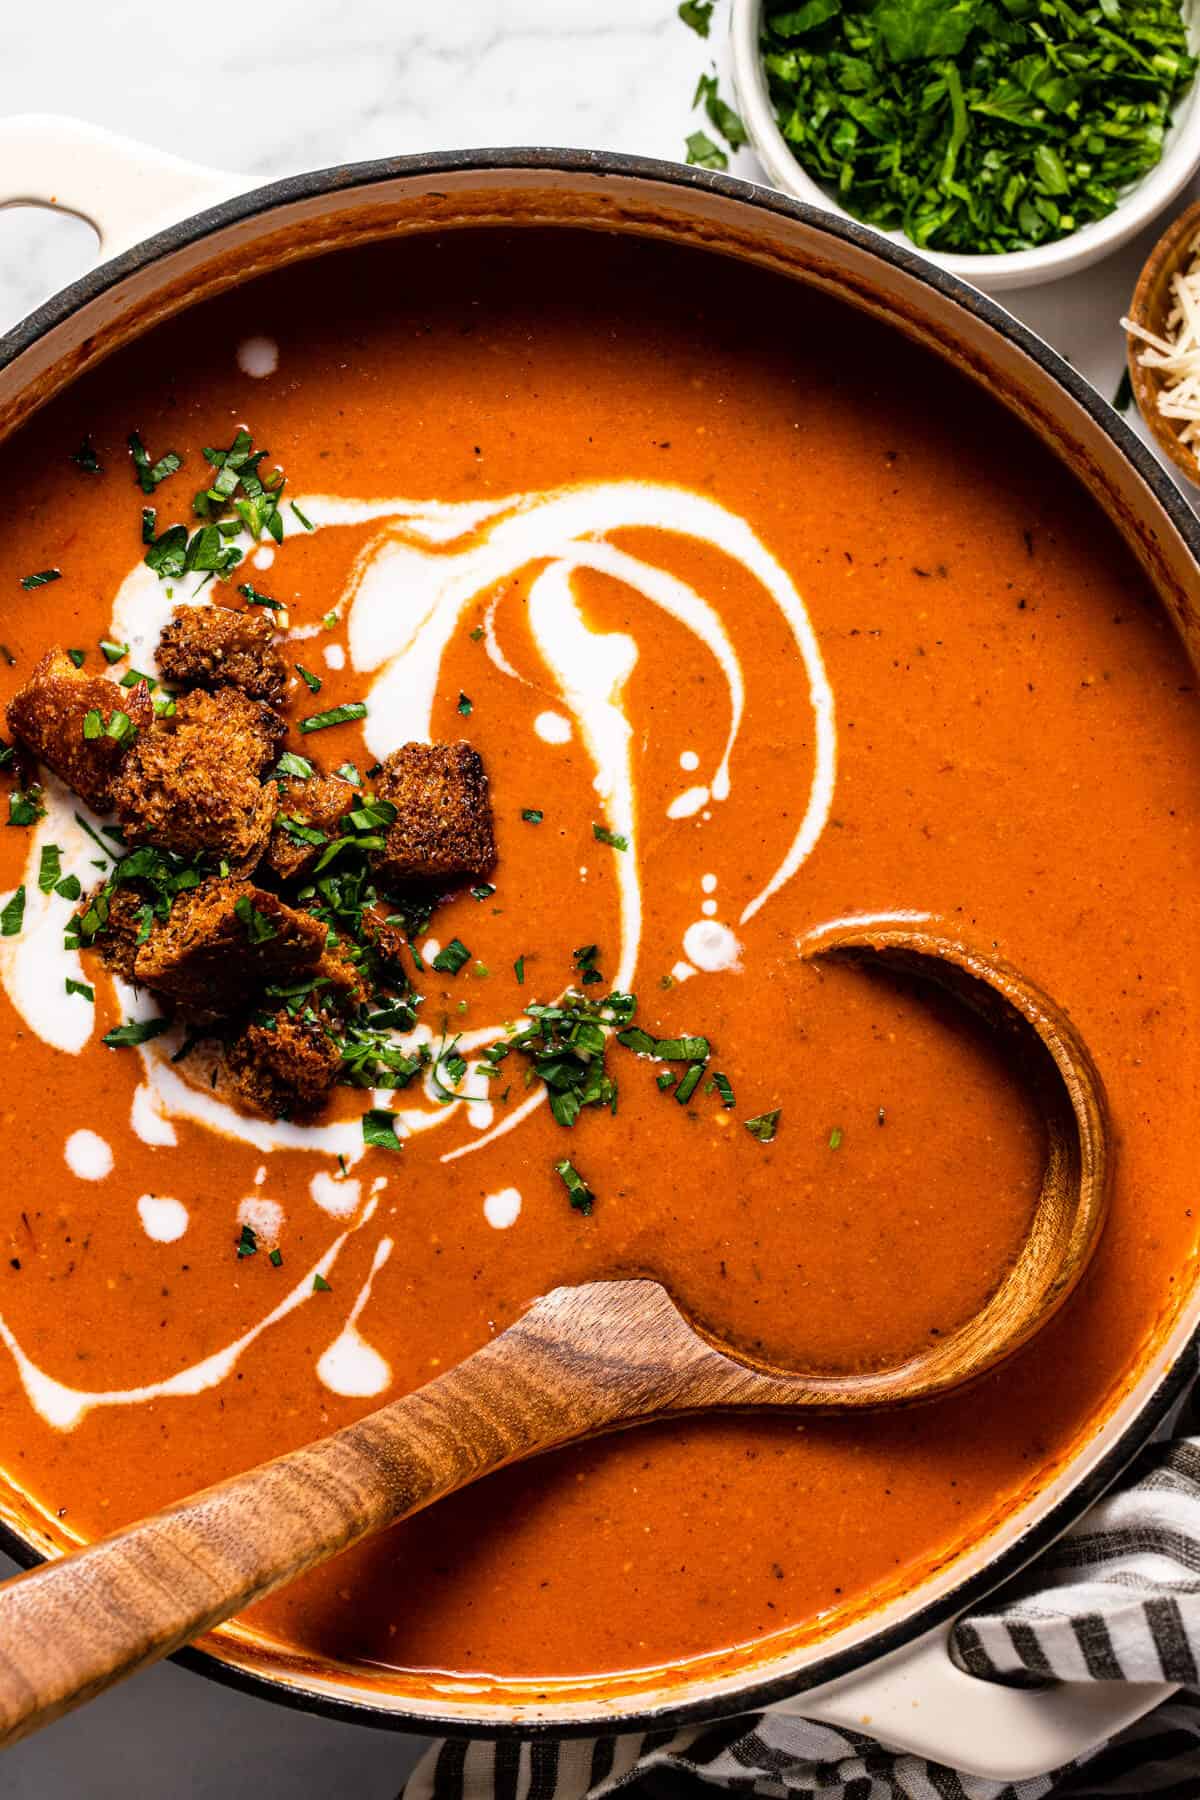 Large pot filled with creamy vegan tomato soup garnished with croutons